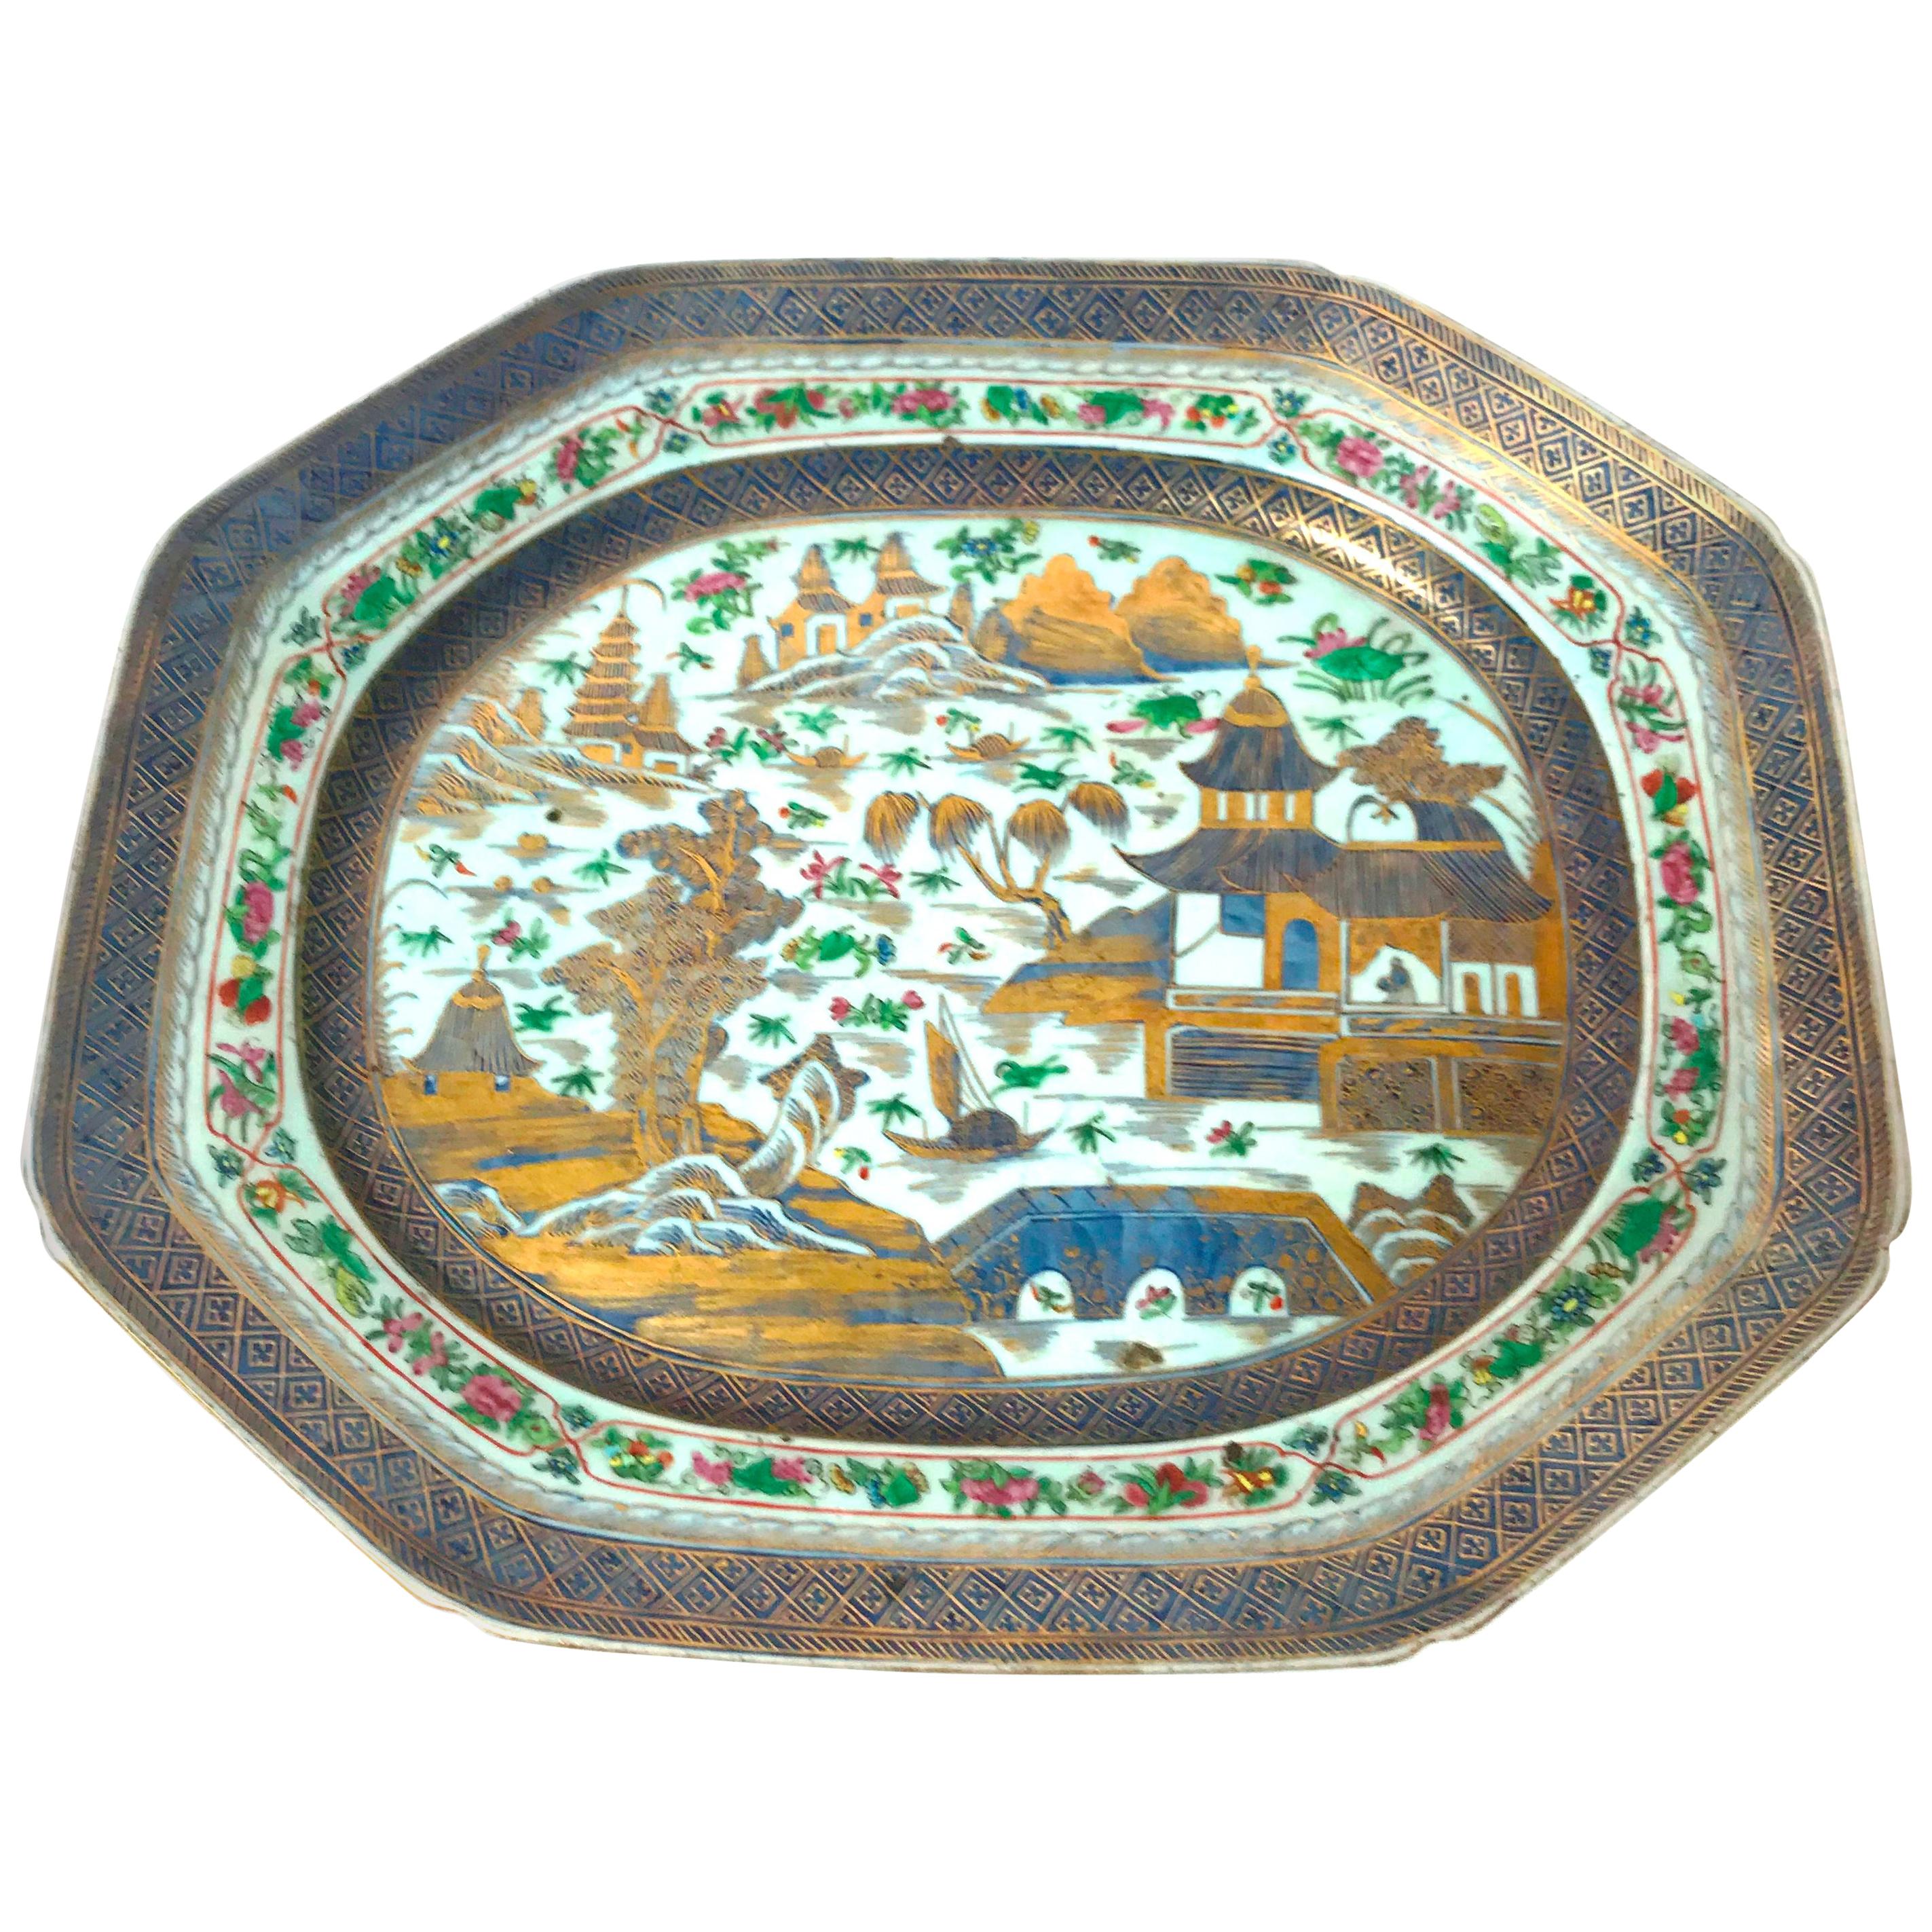 Rare Exceptional Large 18th Century Chinese Export Platter For Sale